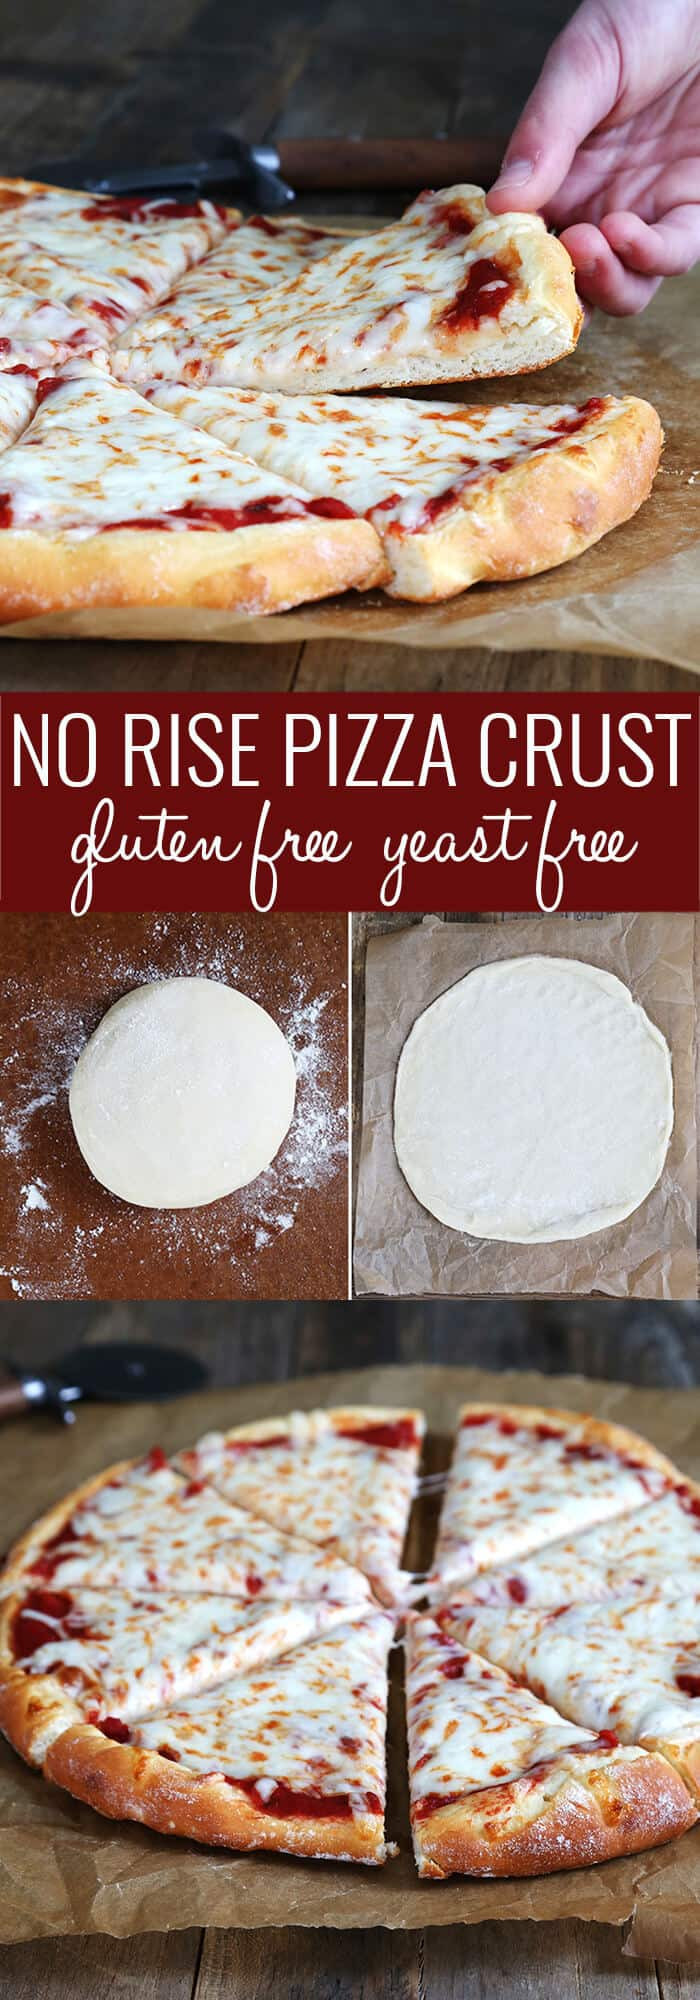 Yeast Free Pizza Dough Recipe
 Yeast Free Gluten Free Pizza Dough Ready in minutes